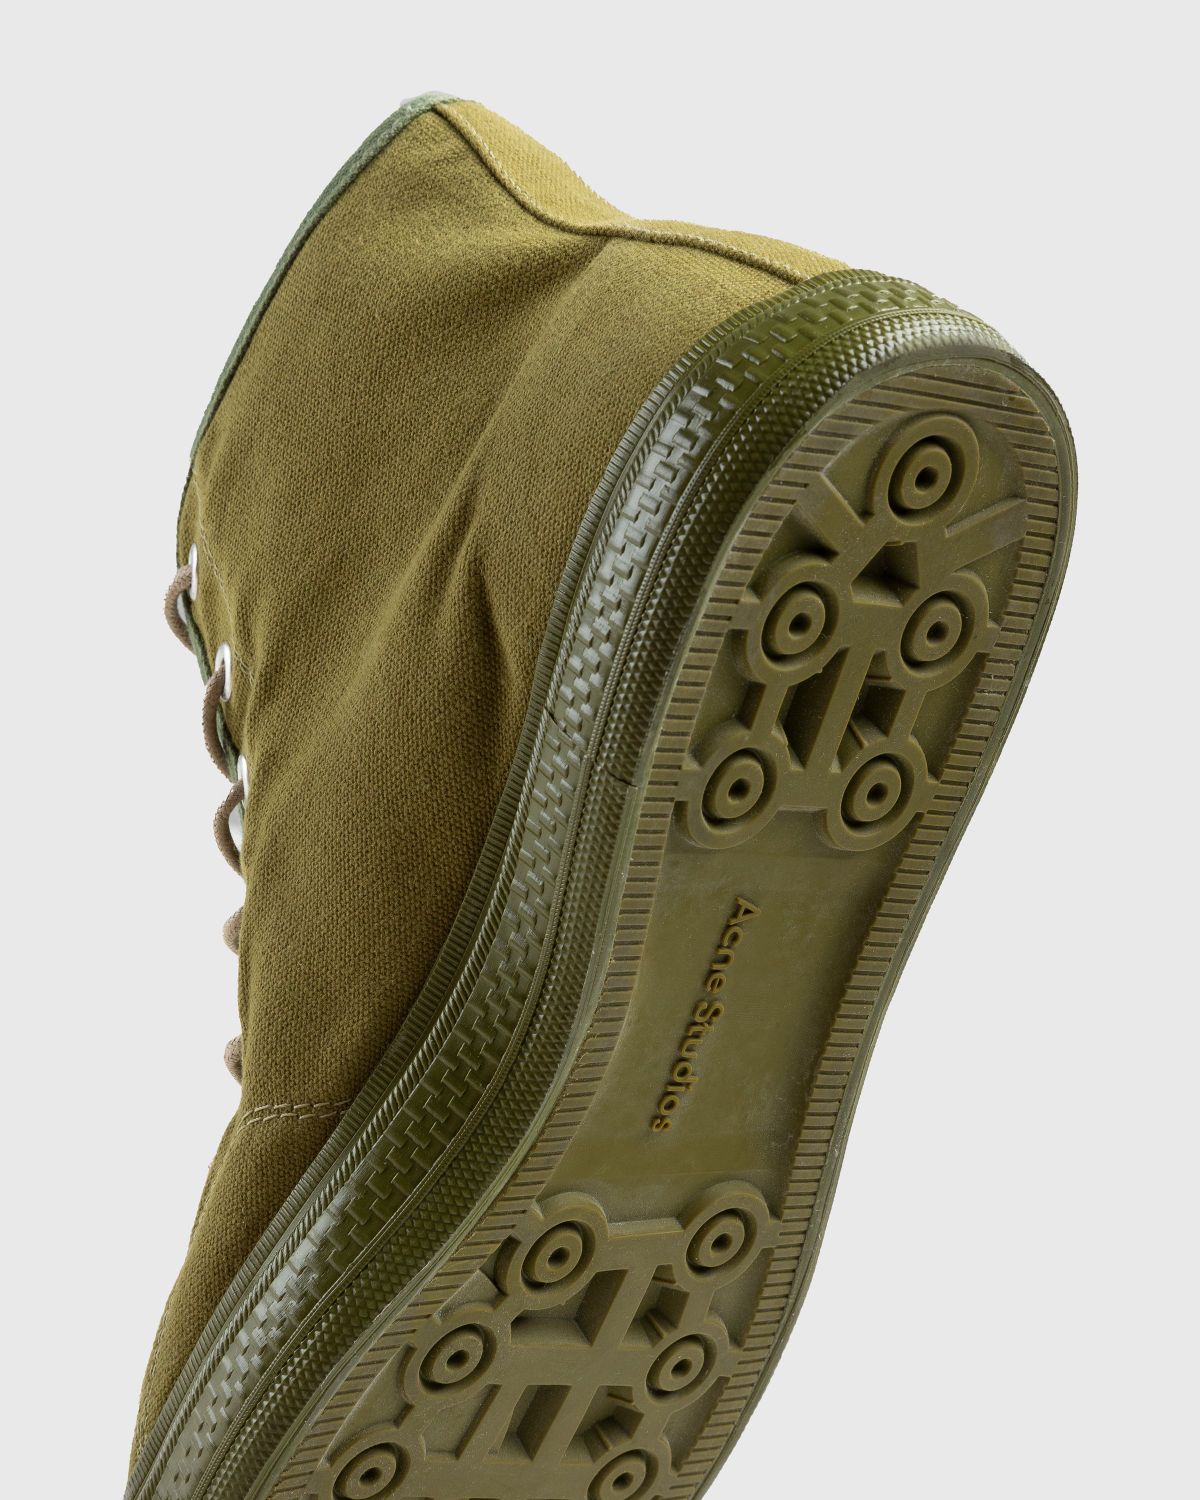 Acne Studios – Ballow High-Top Sneakers Olive Green - High Top Sneakers - Green - Image 6